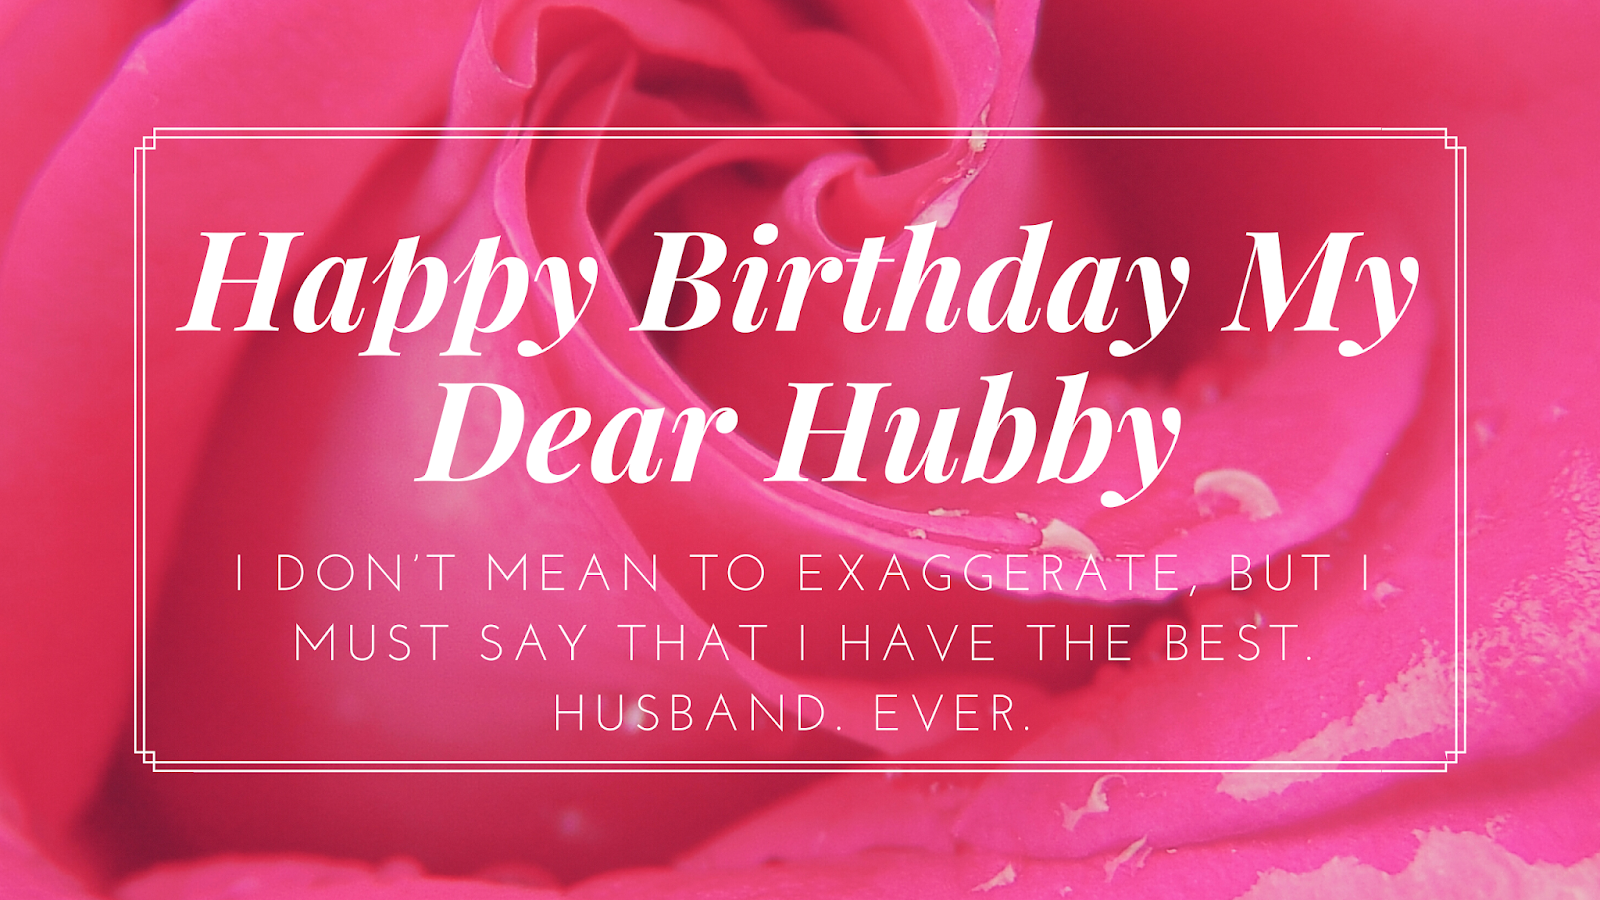 Romantic birthday wishes for a husband